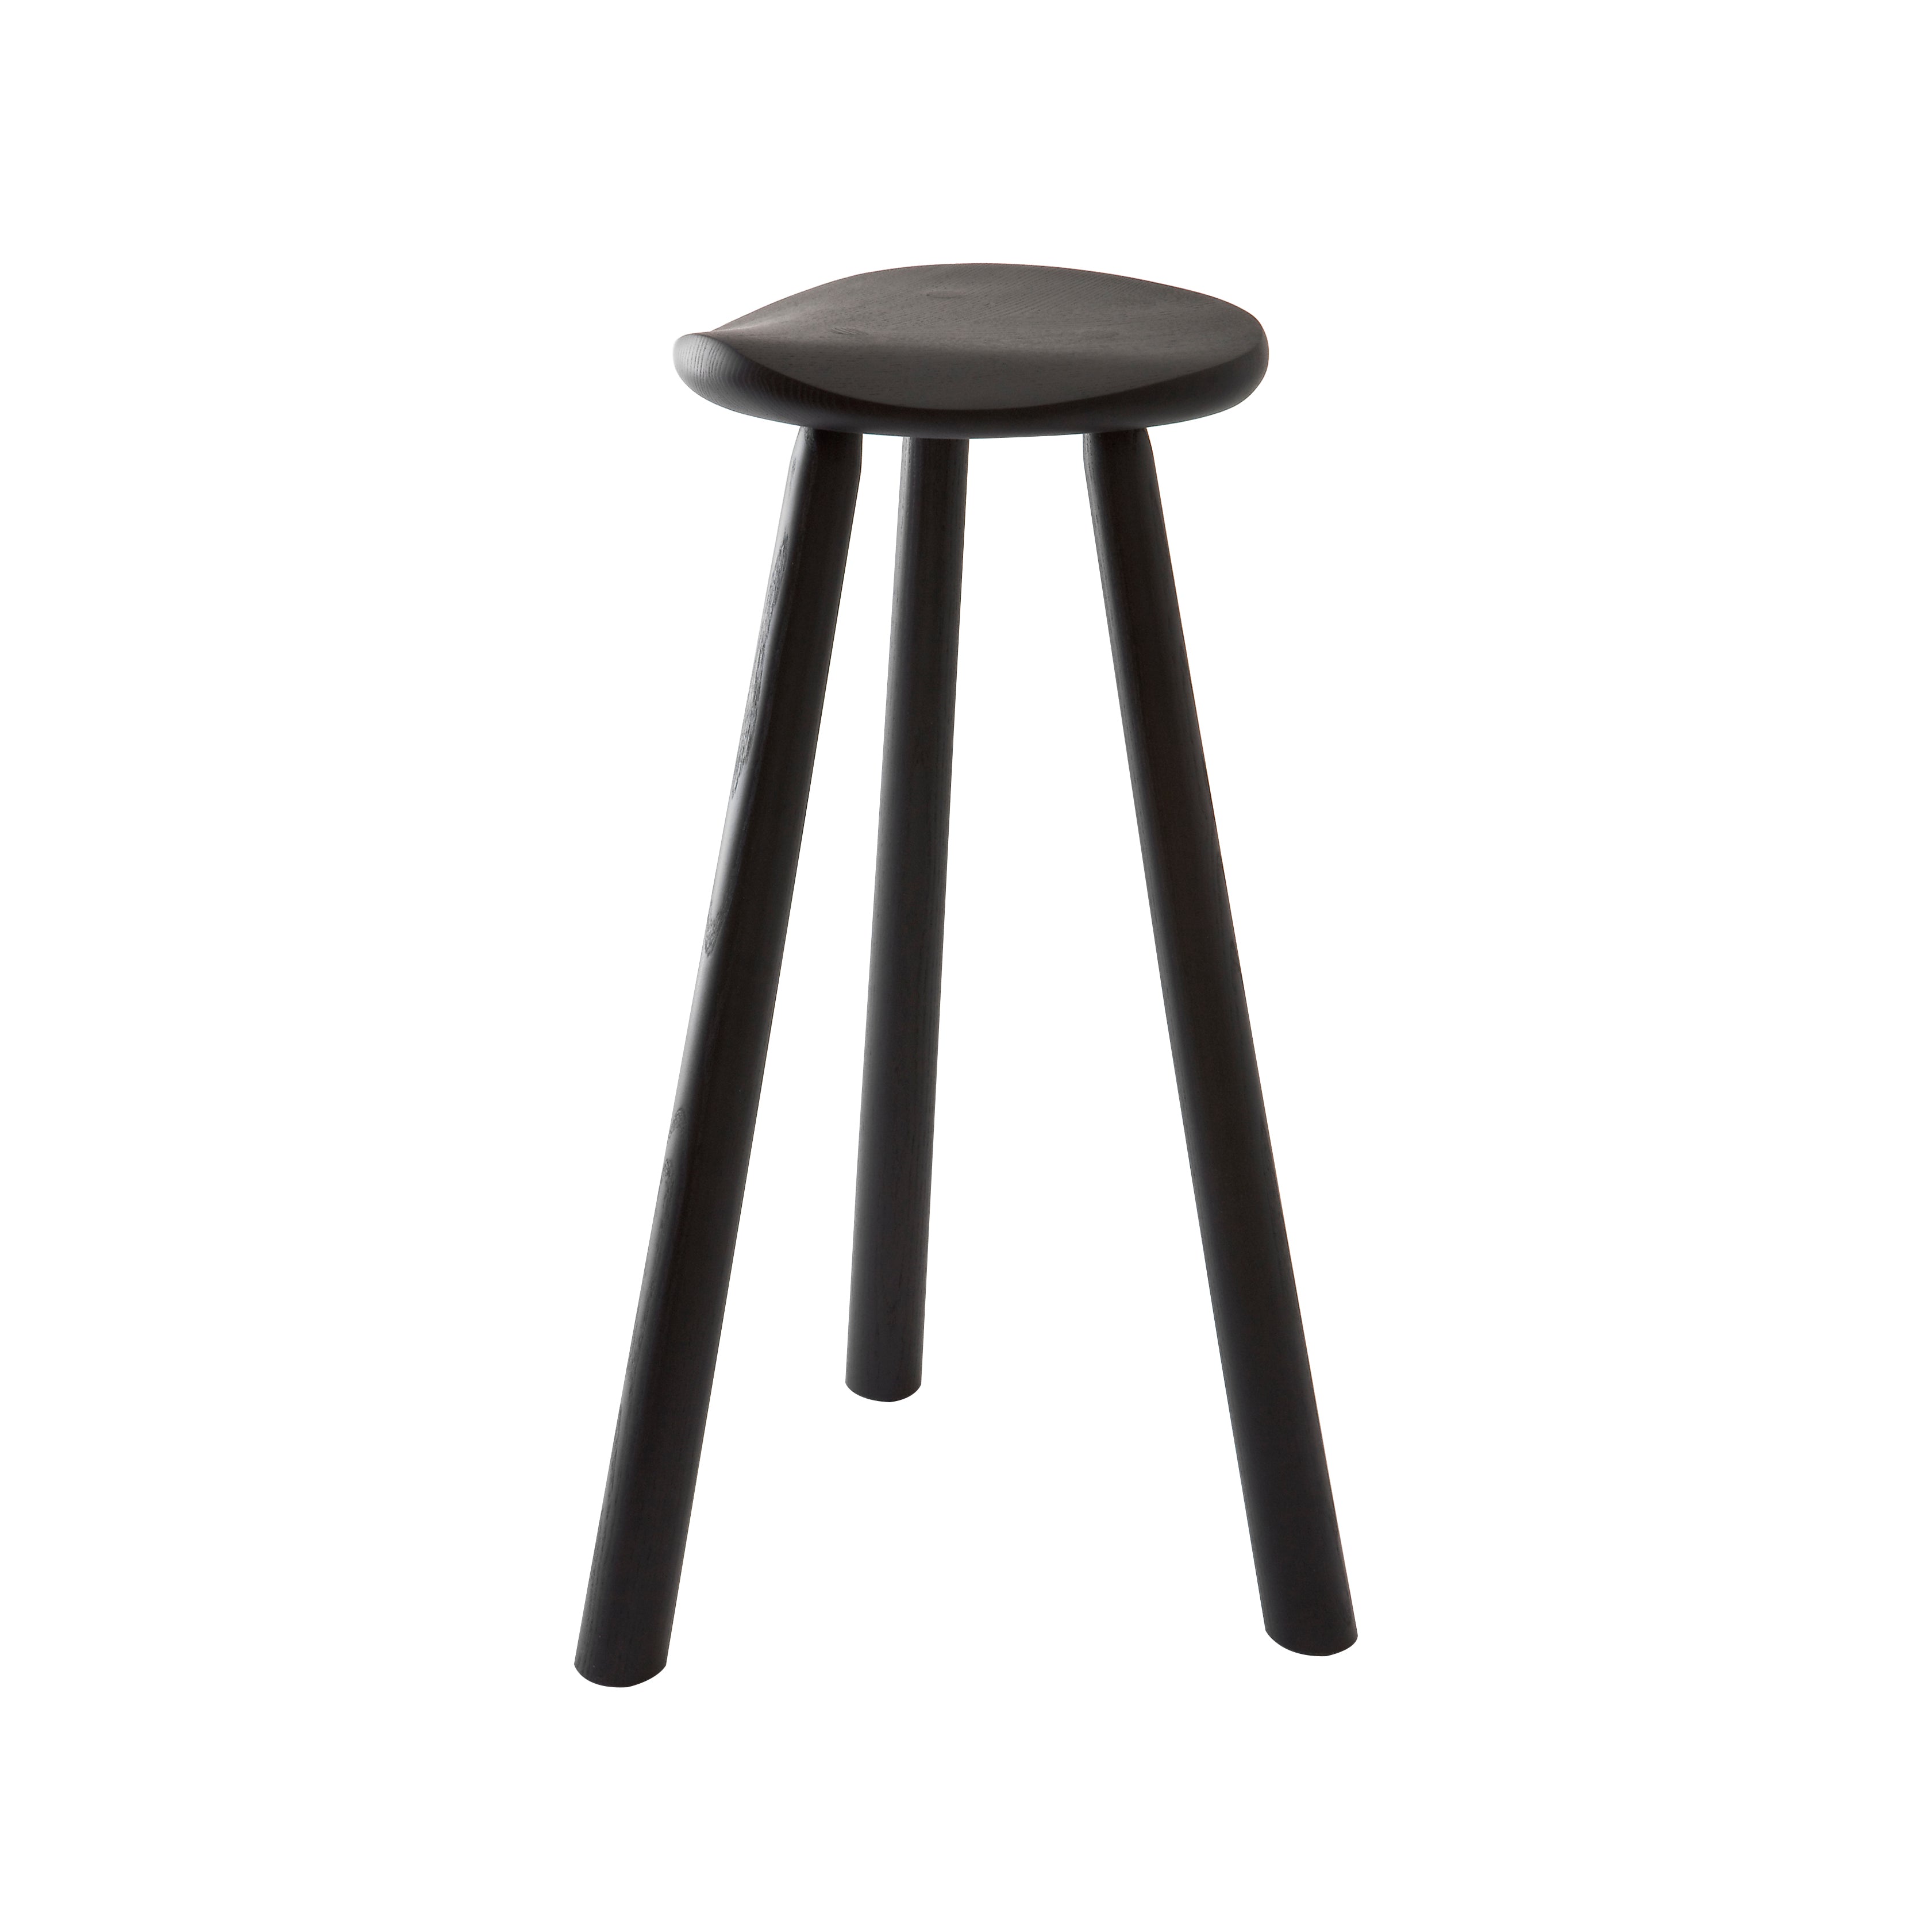 Classic RMJ Stool: Counter + Black Stained